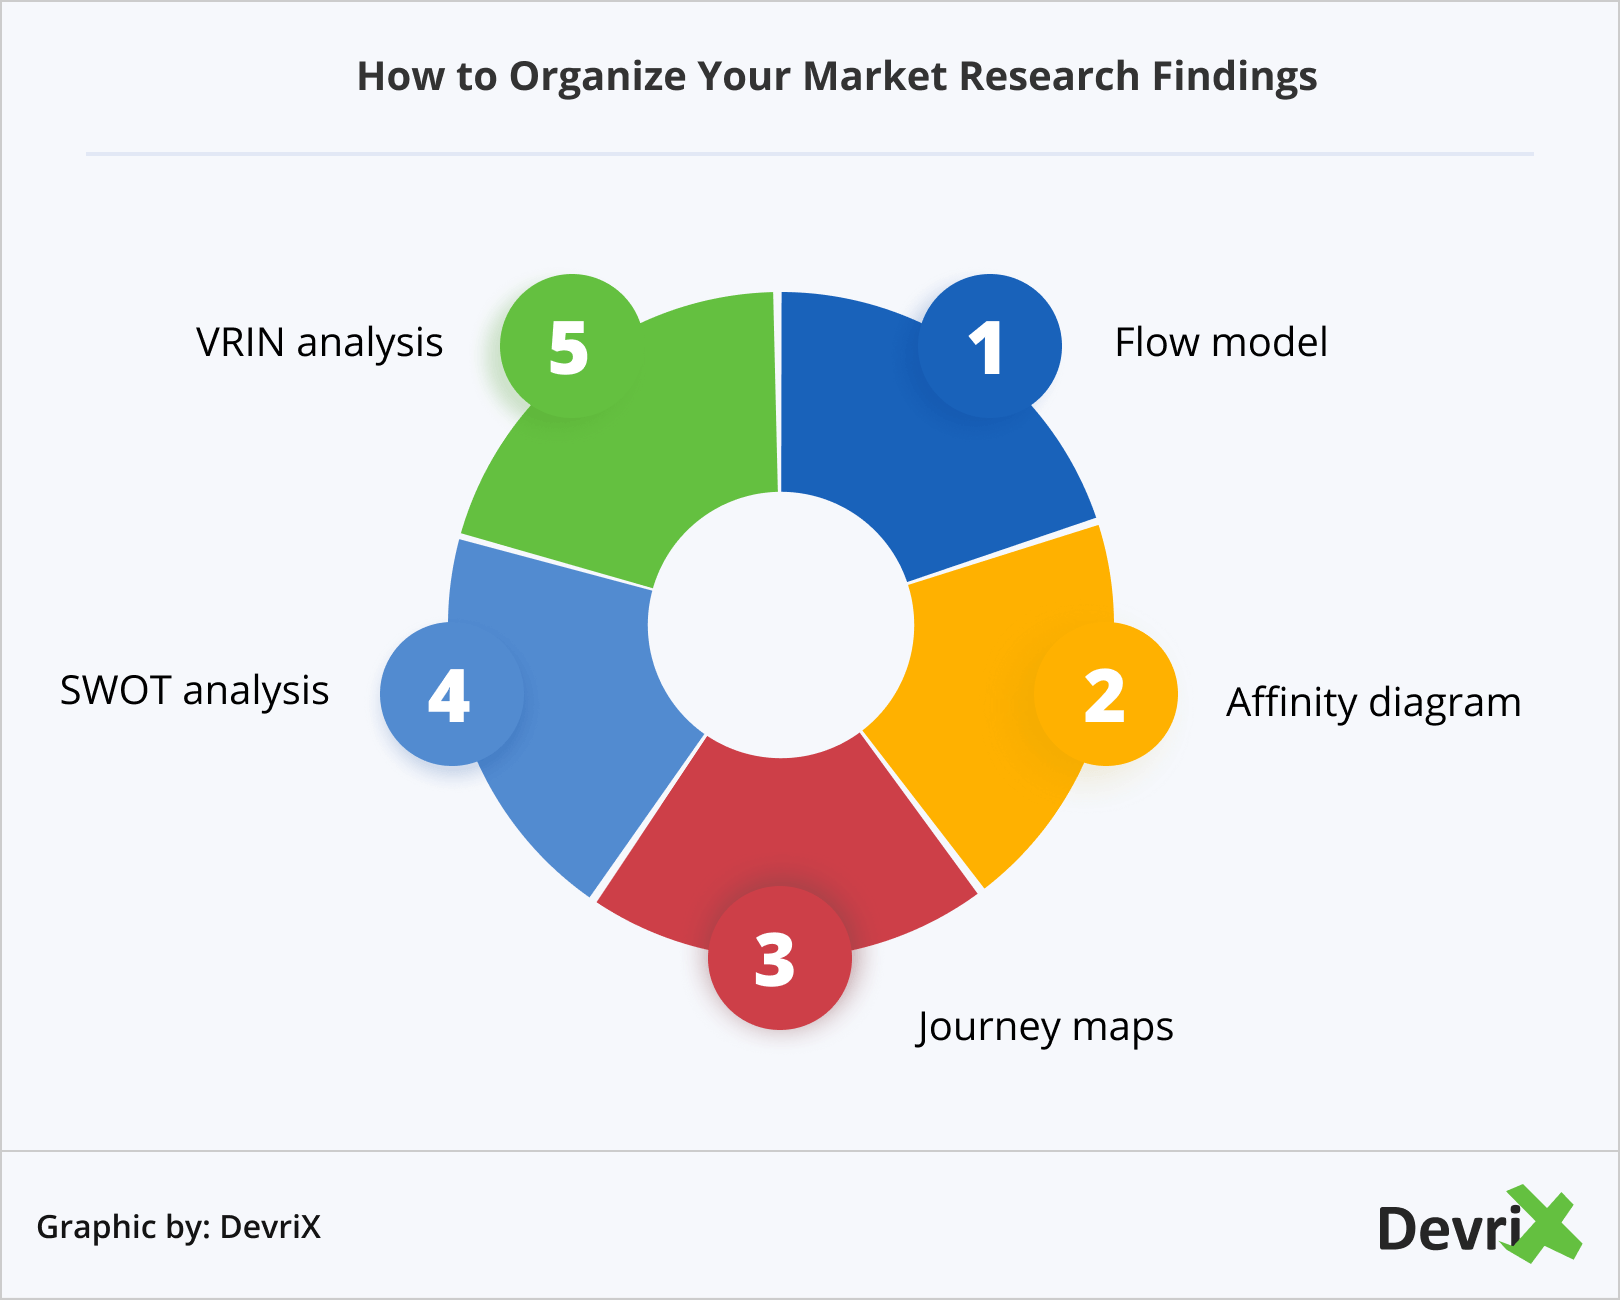 How to Organize Your Market Research Findings